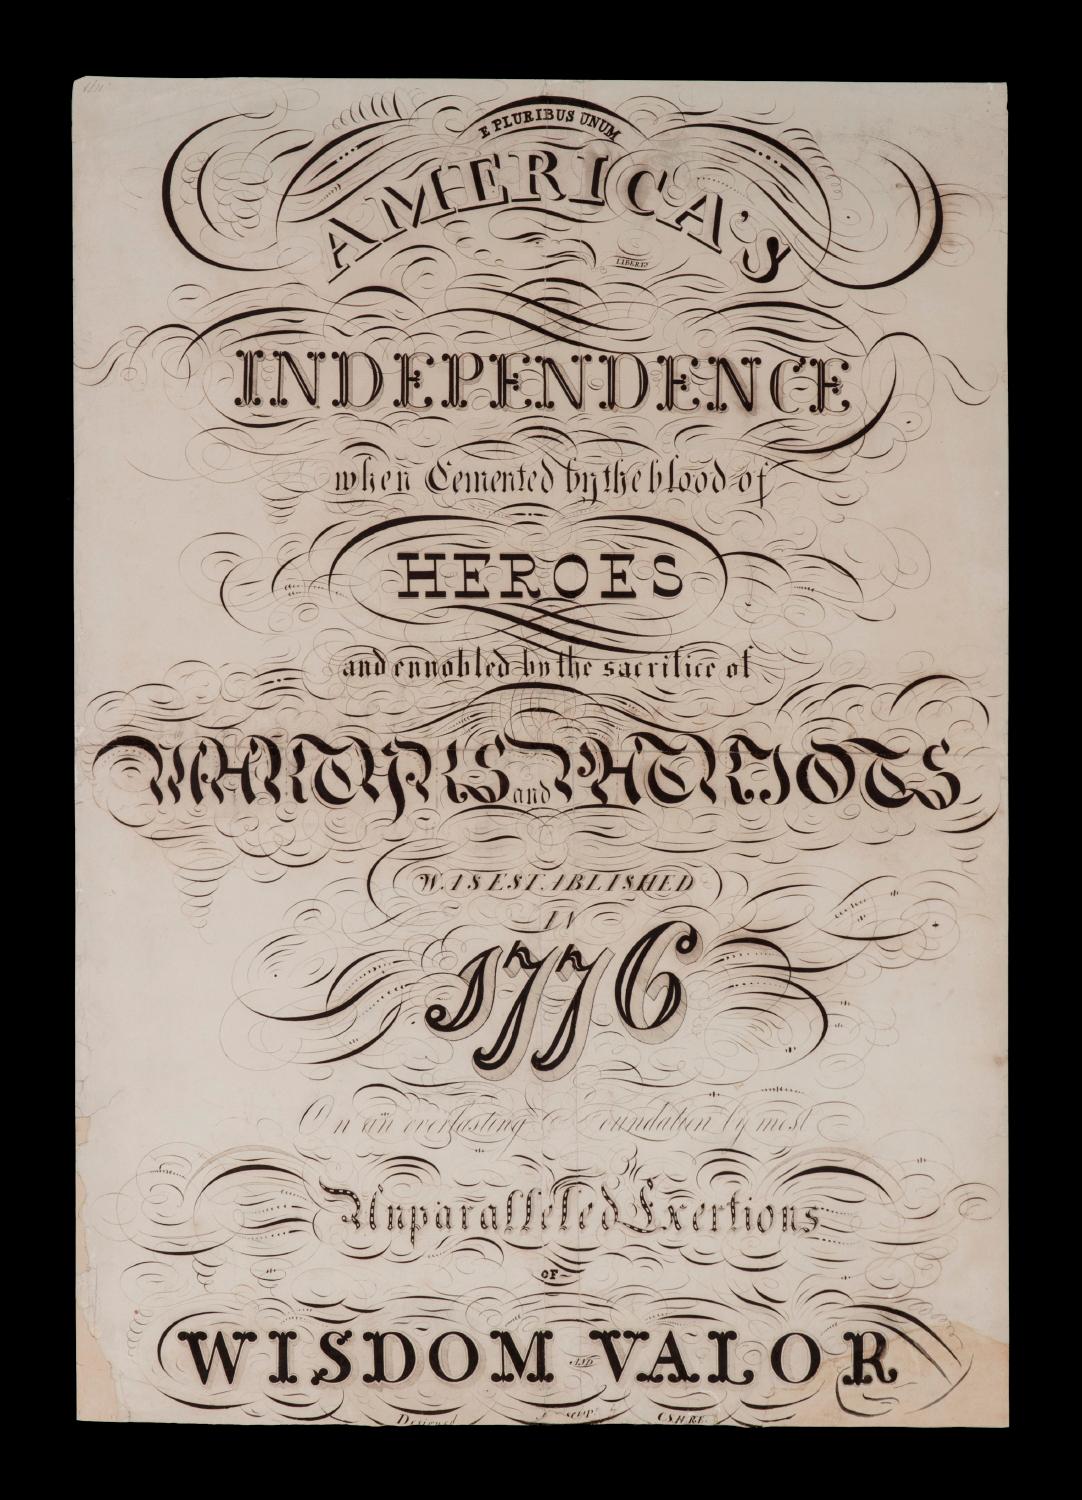 Exceptional Patriotic Calligraphy With Revolutionary War Reference, Made Sometime Between The Civil War (1861-1865) and The 1876 Centennial of American Independence

Whimsical pen and ink calligraphy with exuberantly embellished text that reads as